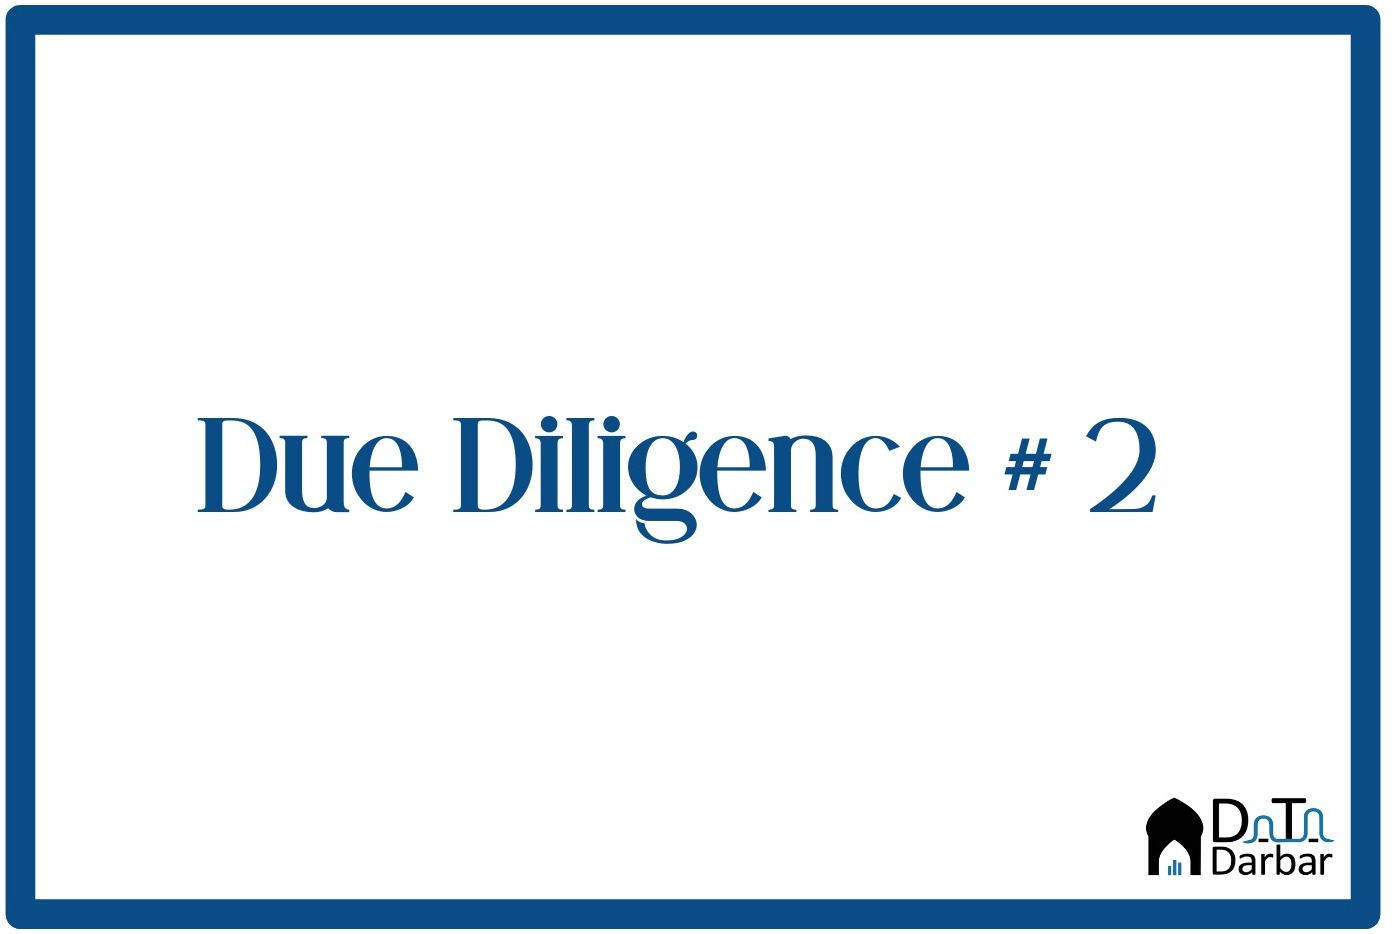 Due Diligence #2: Startup Funding, Pakwheels financials, and how digital wallets make money